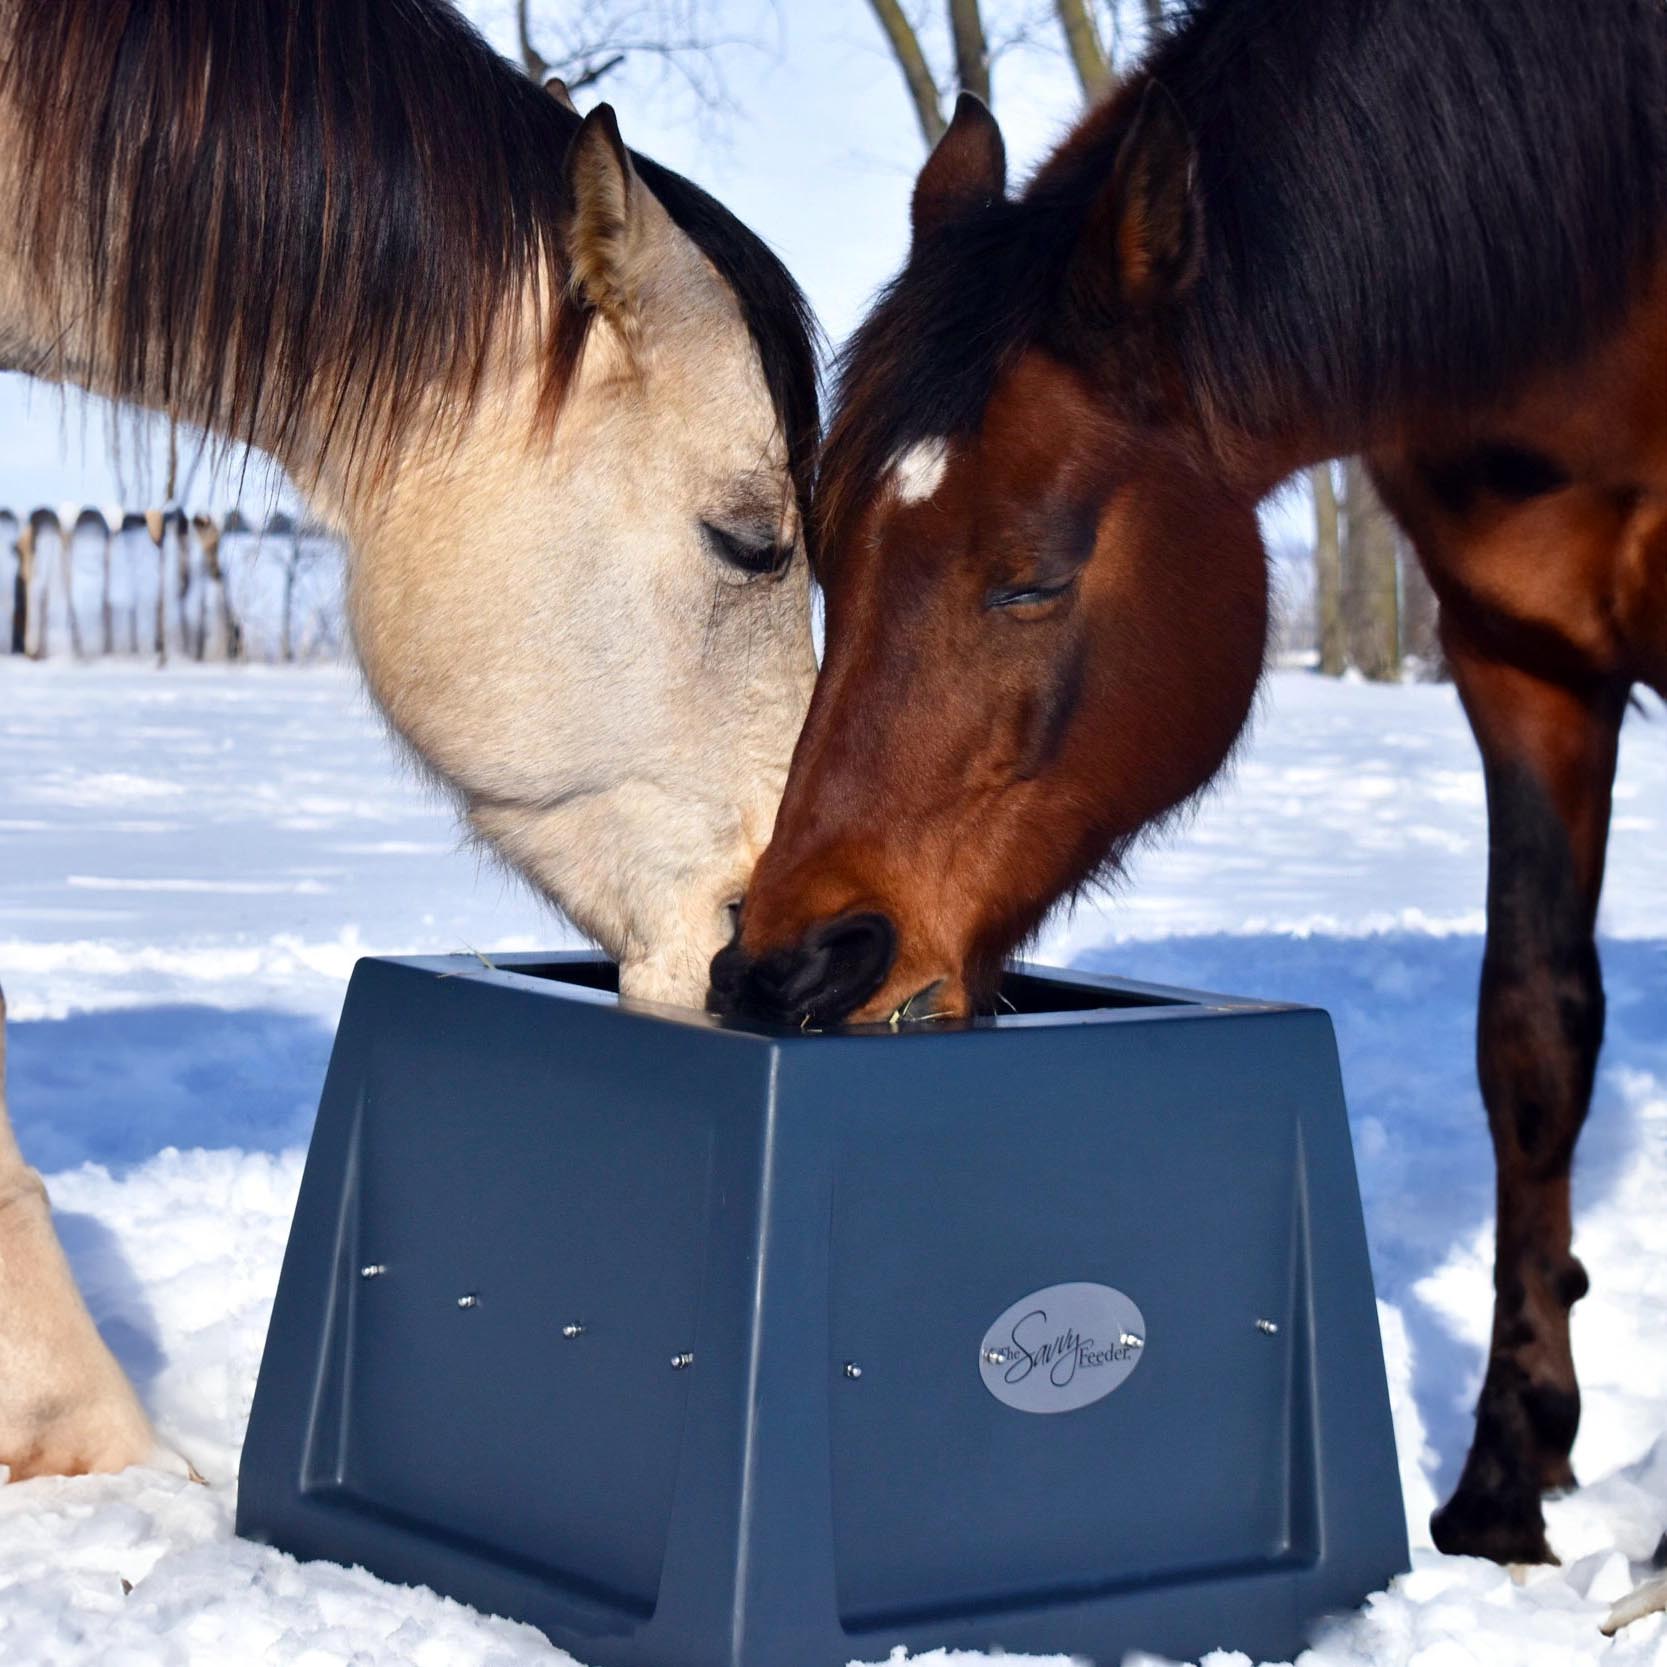 A buckskin and a bay horse both eat from the Savvy Feeder in the snow.